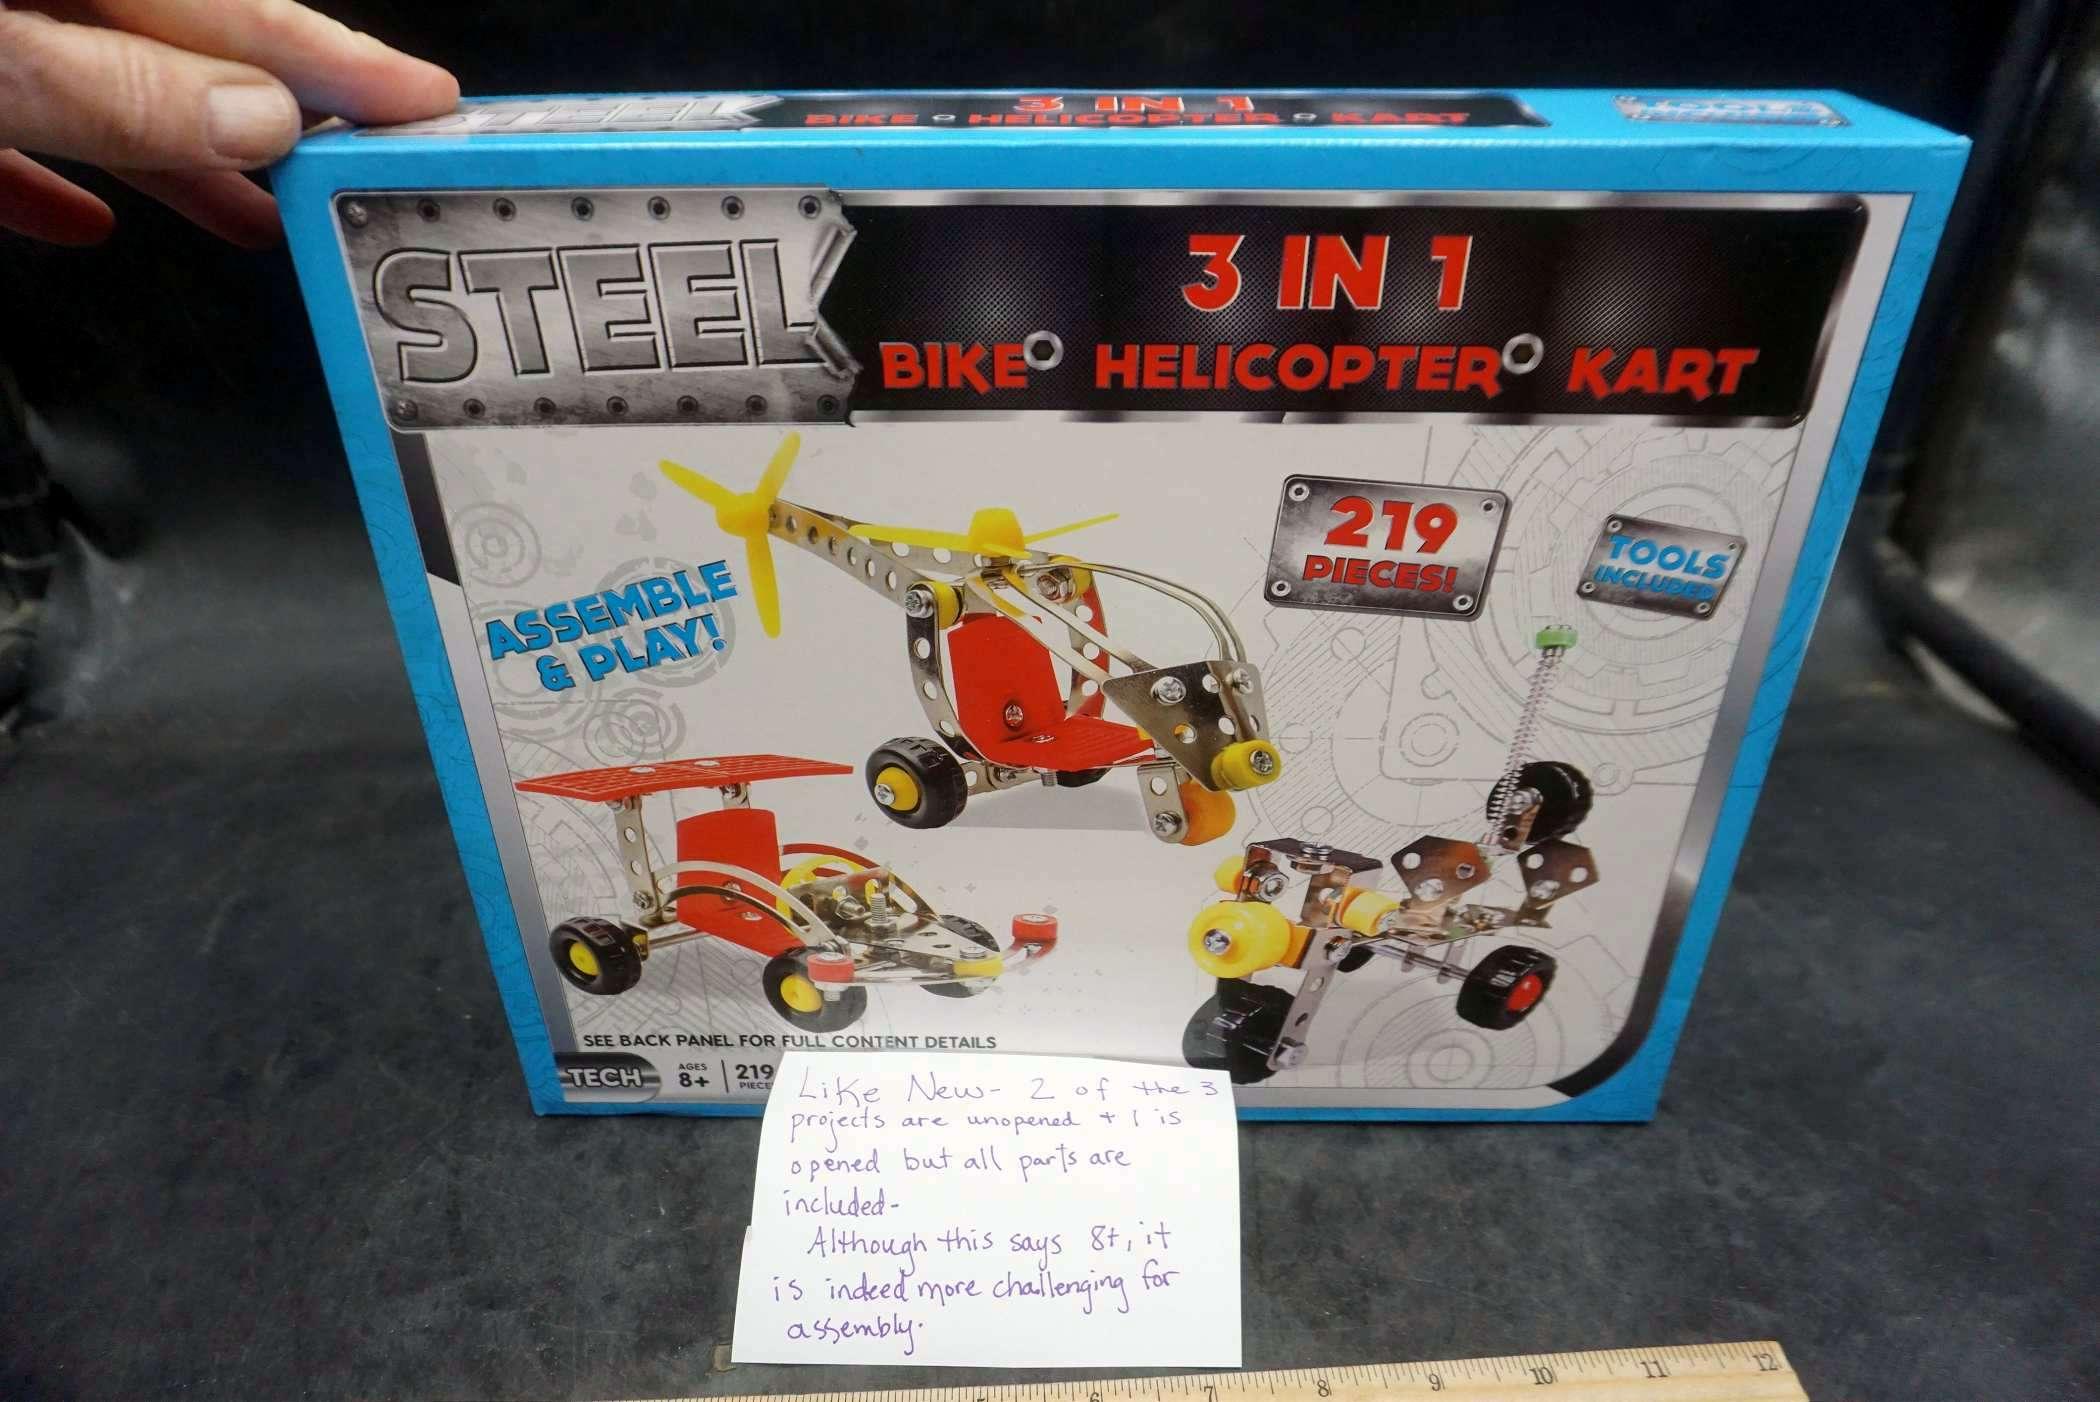 Steel 3 In 1 Bike-Helicopter-Kart (2 Are Not Opened & 1 Is Opened But Complete)